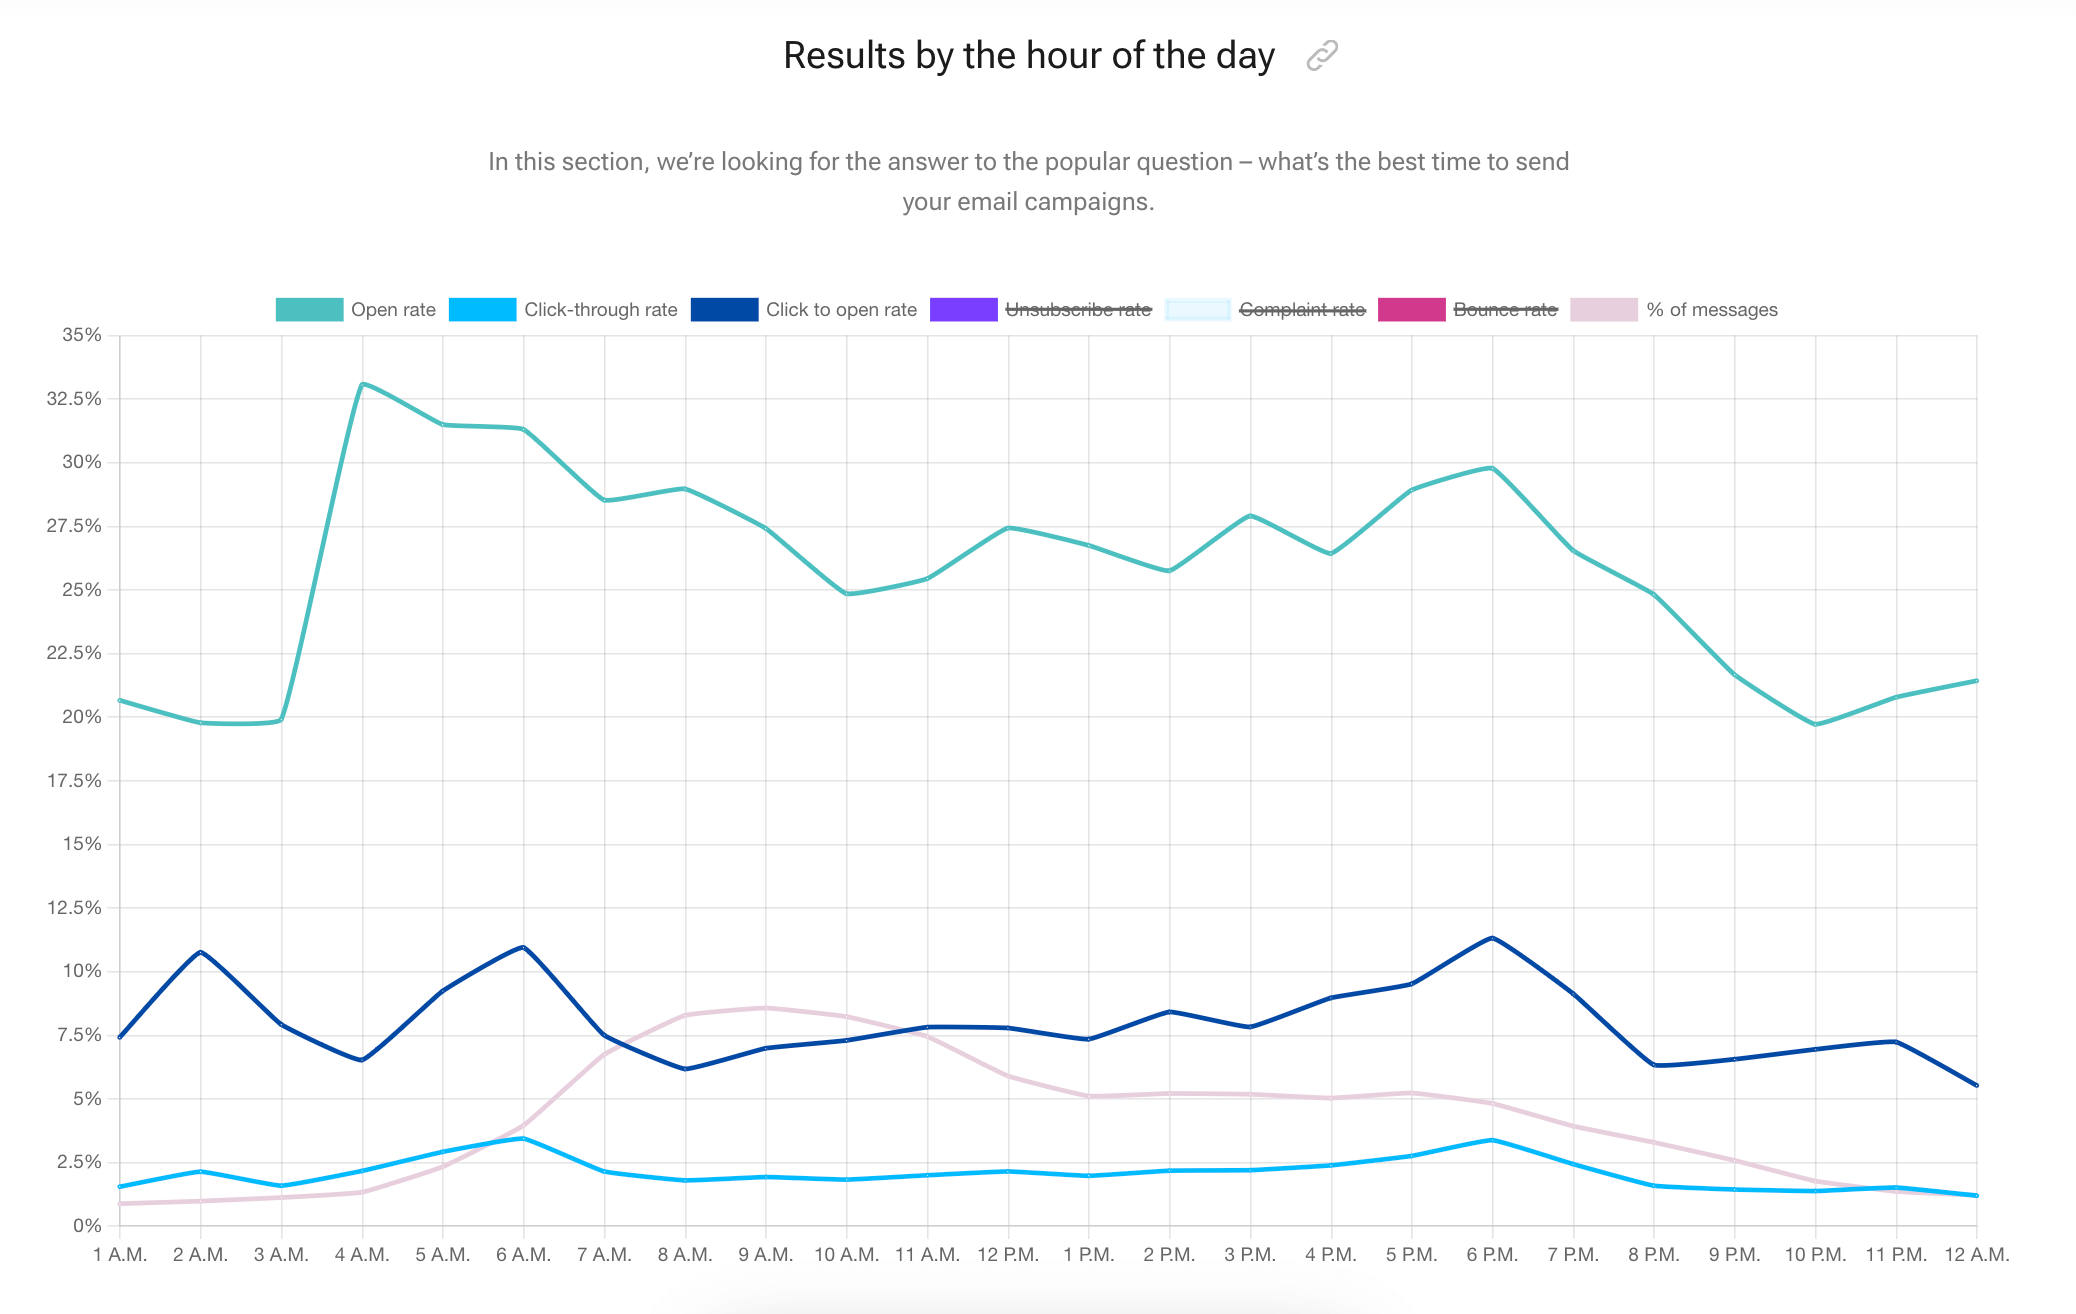 A chart showing OR, CTR, click-to-open rate, and the percent of messages by the hour of day. The engagement metrics spike in the early morning and the evening.